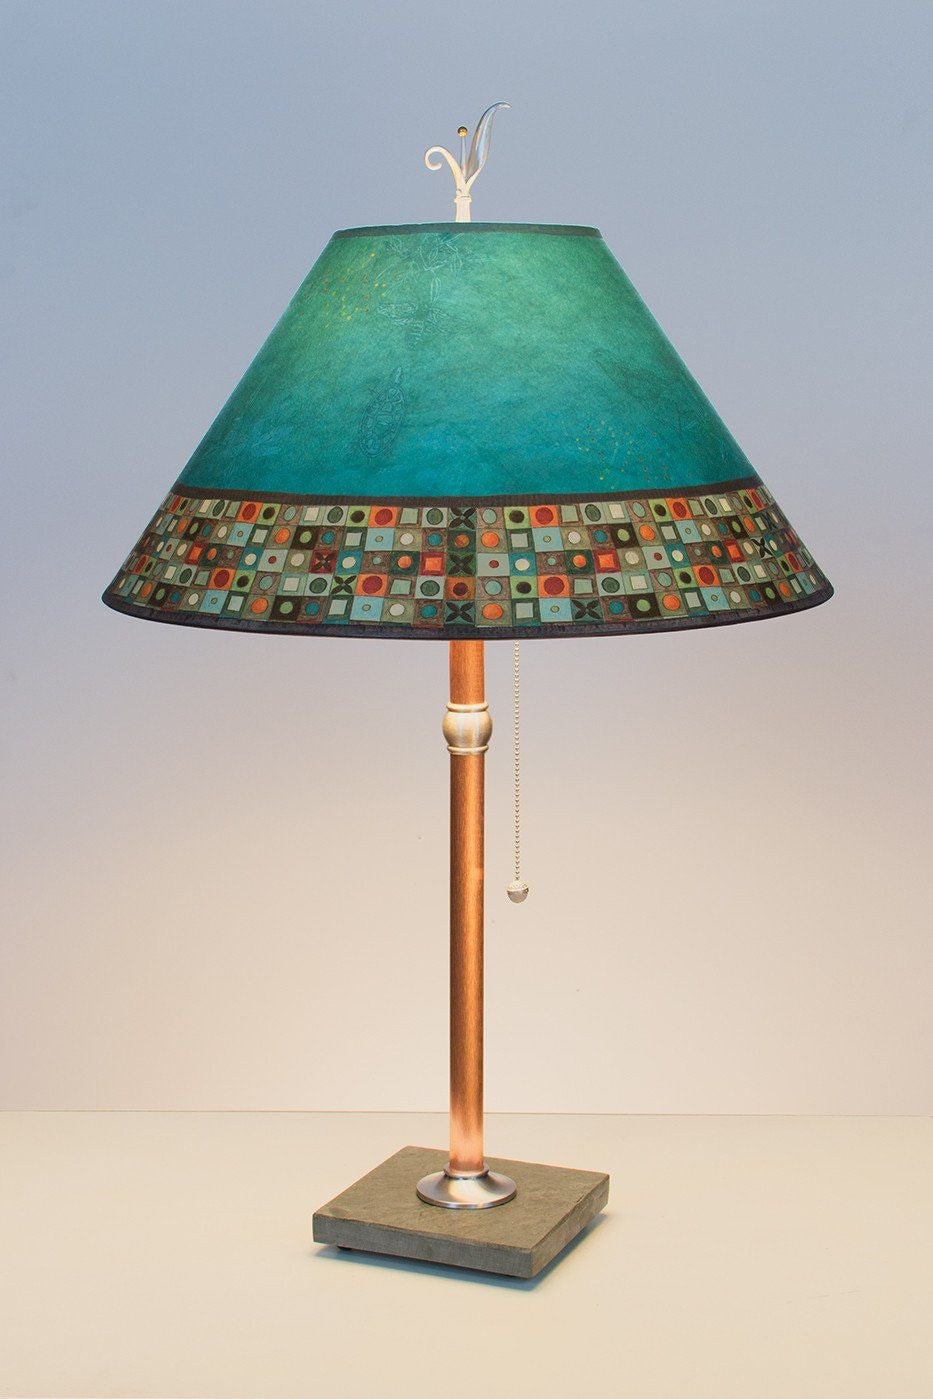 Janna Ugone & Co Table Lamps Copper Table Lamp with Large Conical Shade in Jade Mosaic